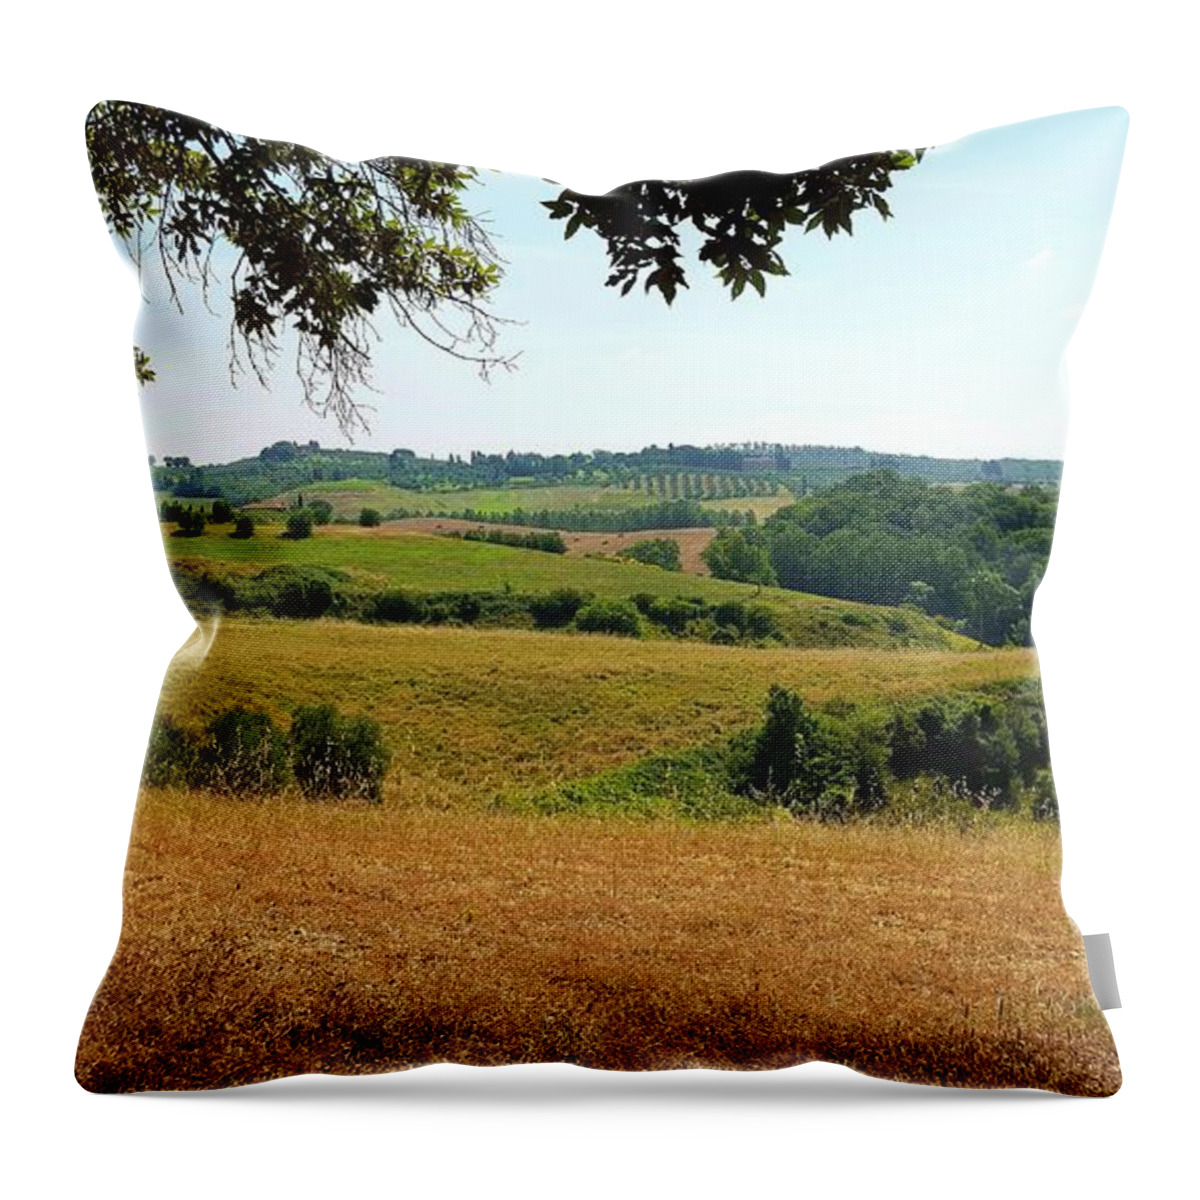 Tuscan Throw Pillow featuring the photograph Tuscan Country by Valentino Visentini